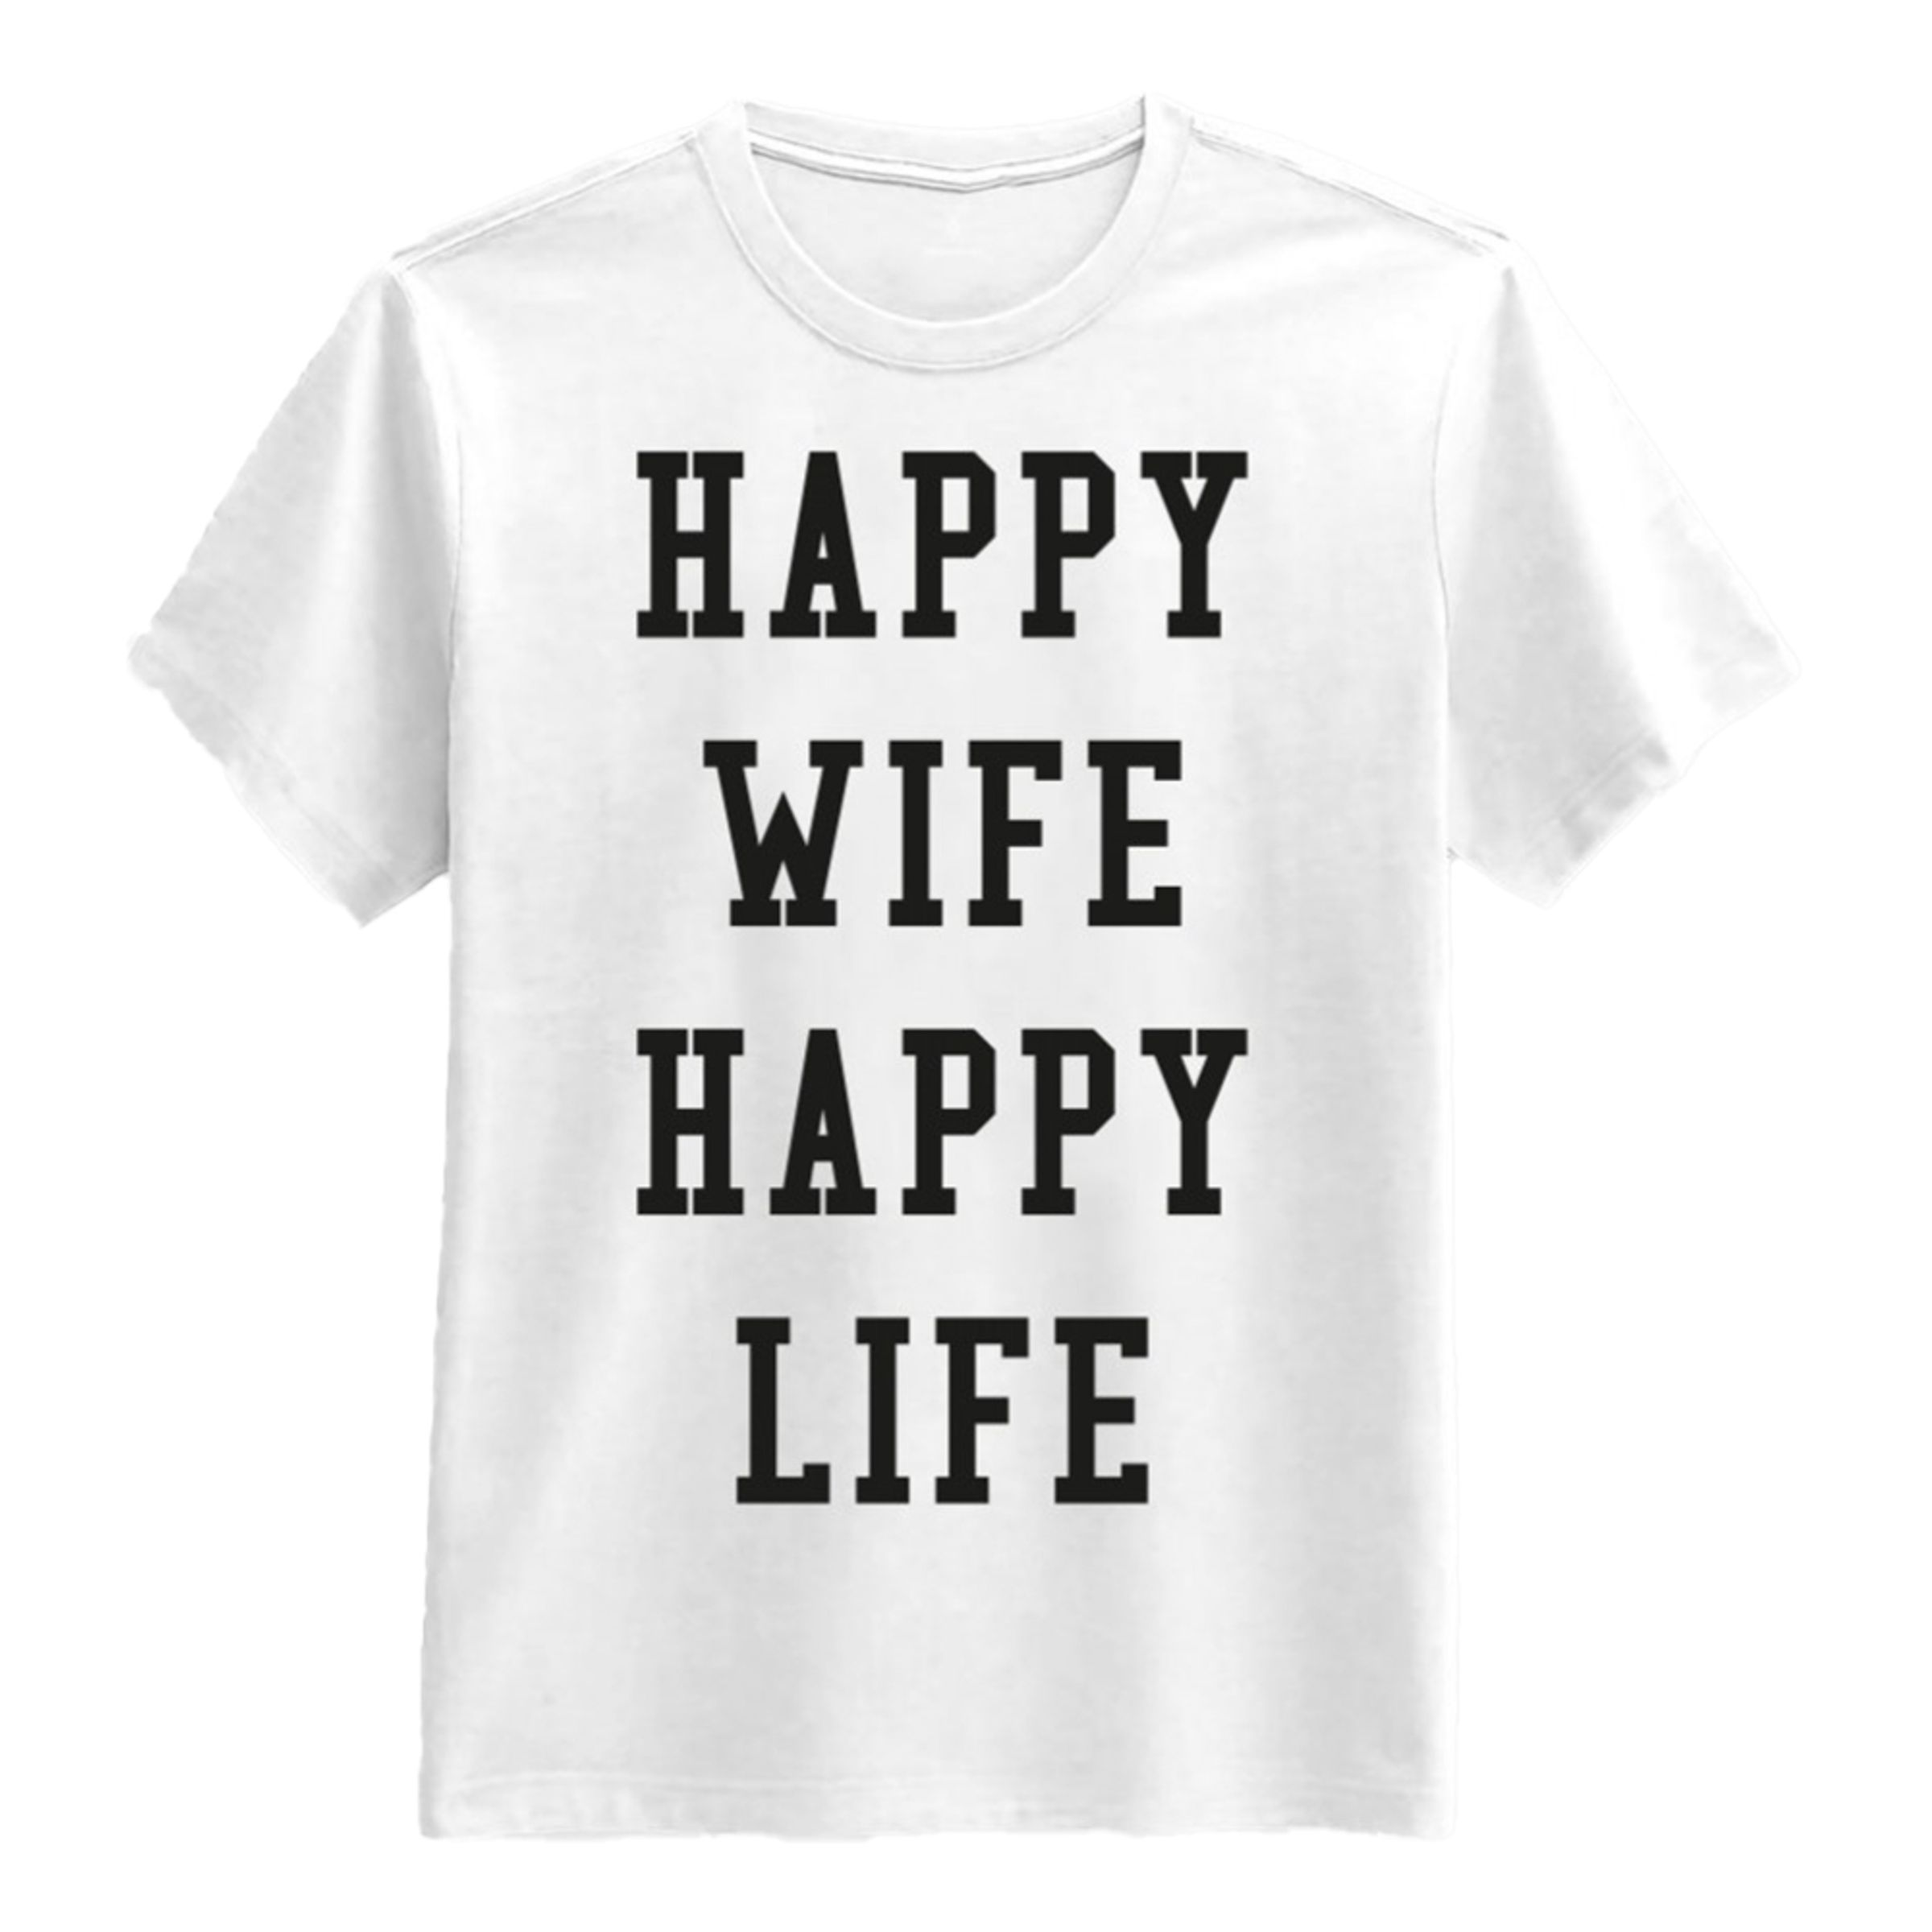 Happy Wife Happy Life T-shirt - Large